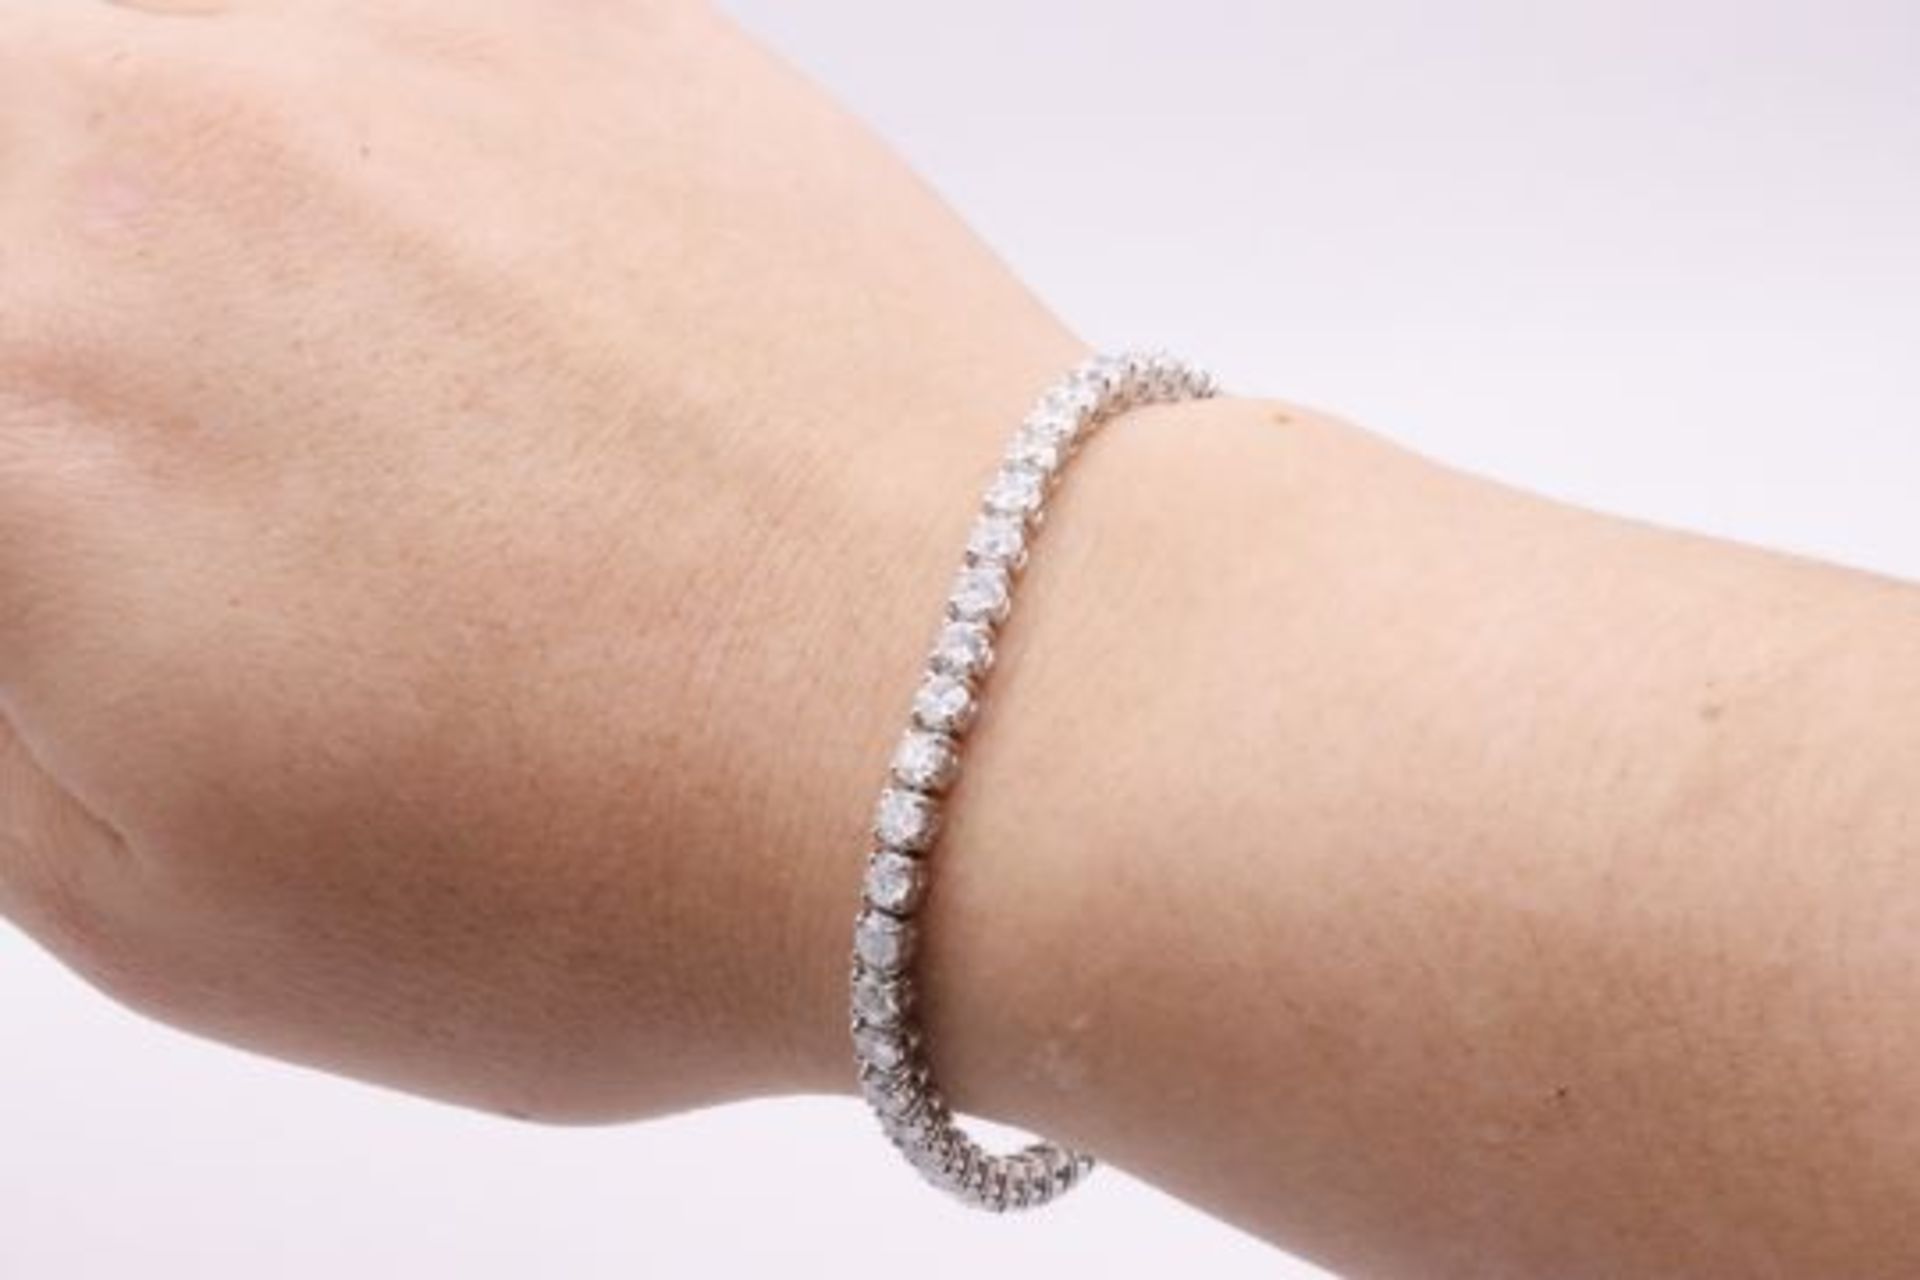 ** ON SALE ** 'Brand New' 9.0 Carat 18ct White Gold Tennis Bracelet set with Round Brilliant Cut - Image 6 of 7